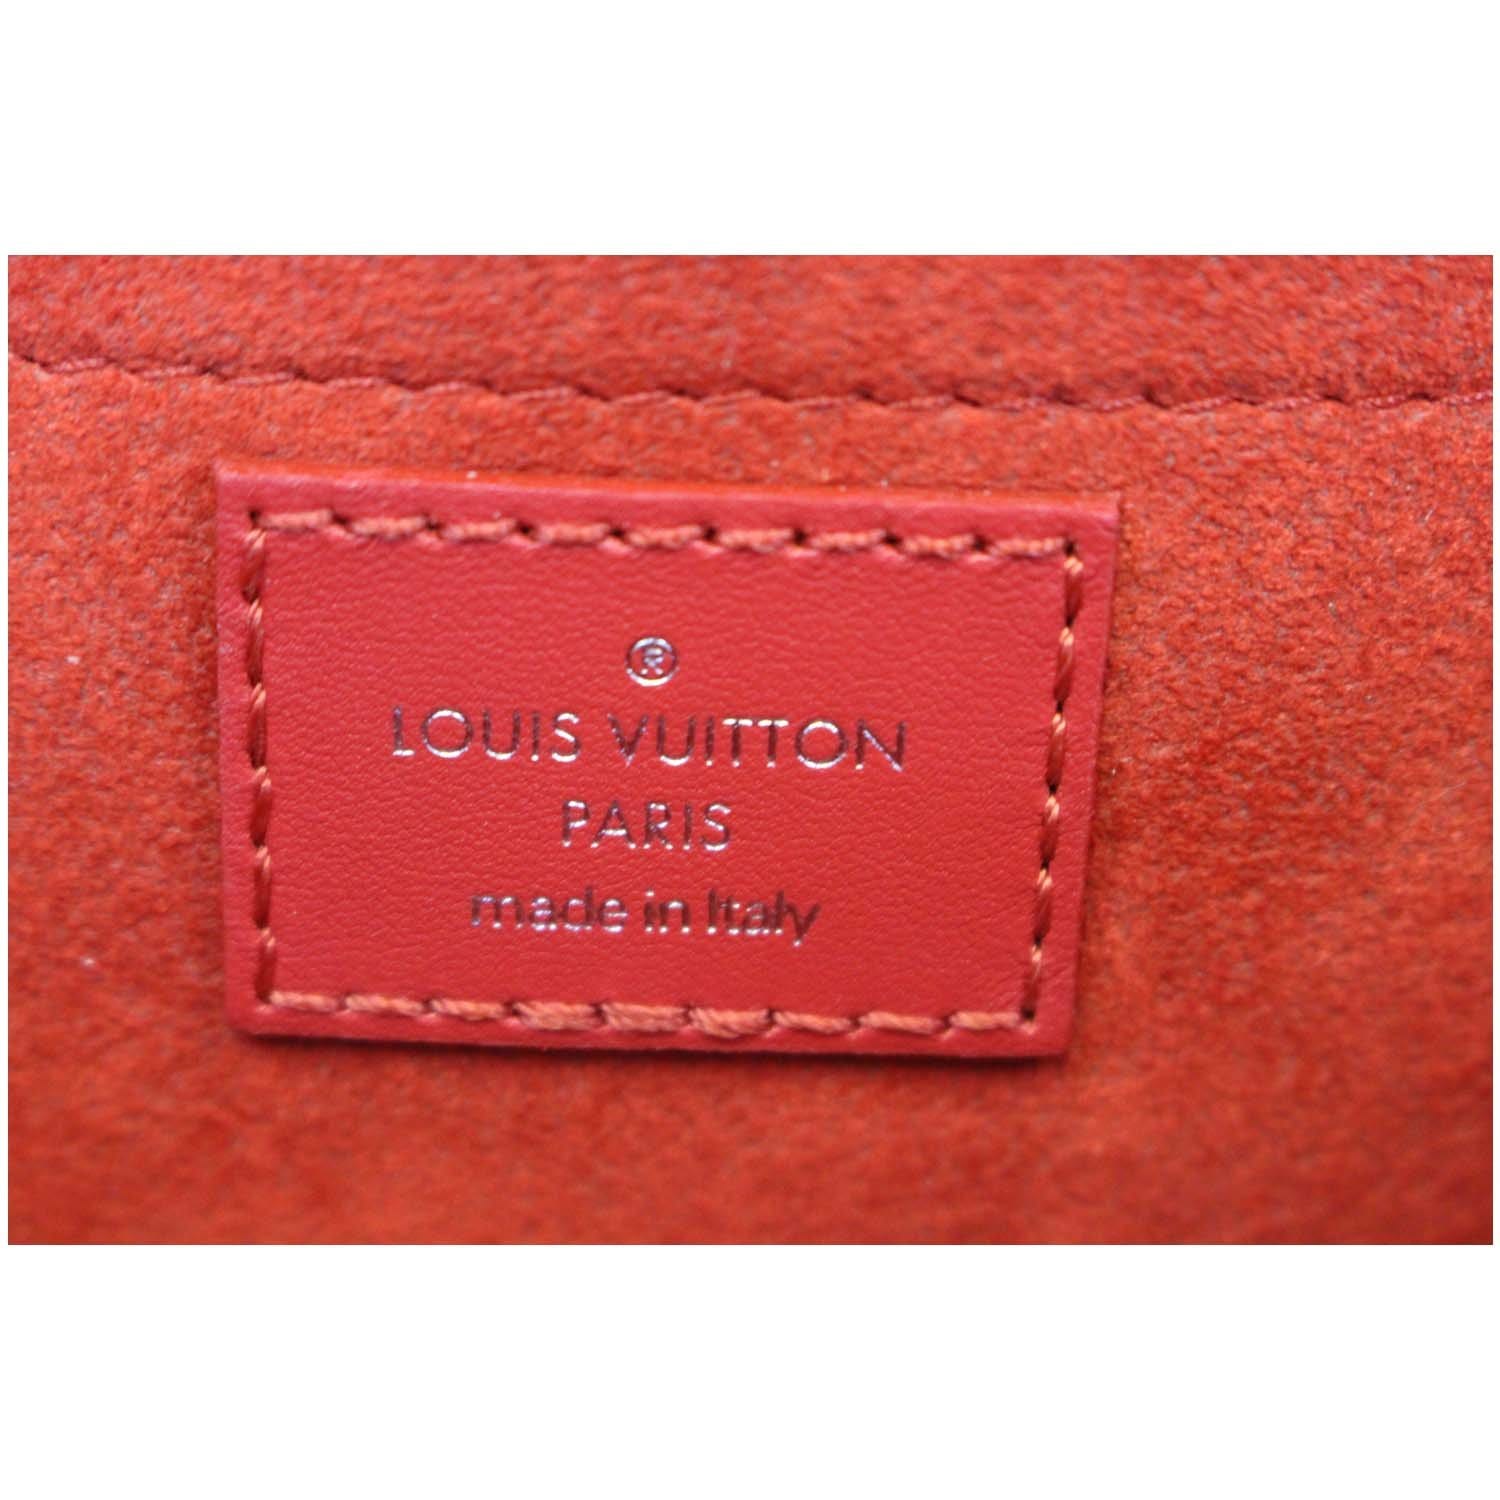 W2C] Anyone know where I can find this Louis Vuitton orange ribbed